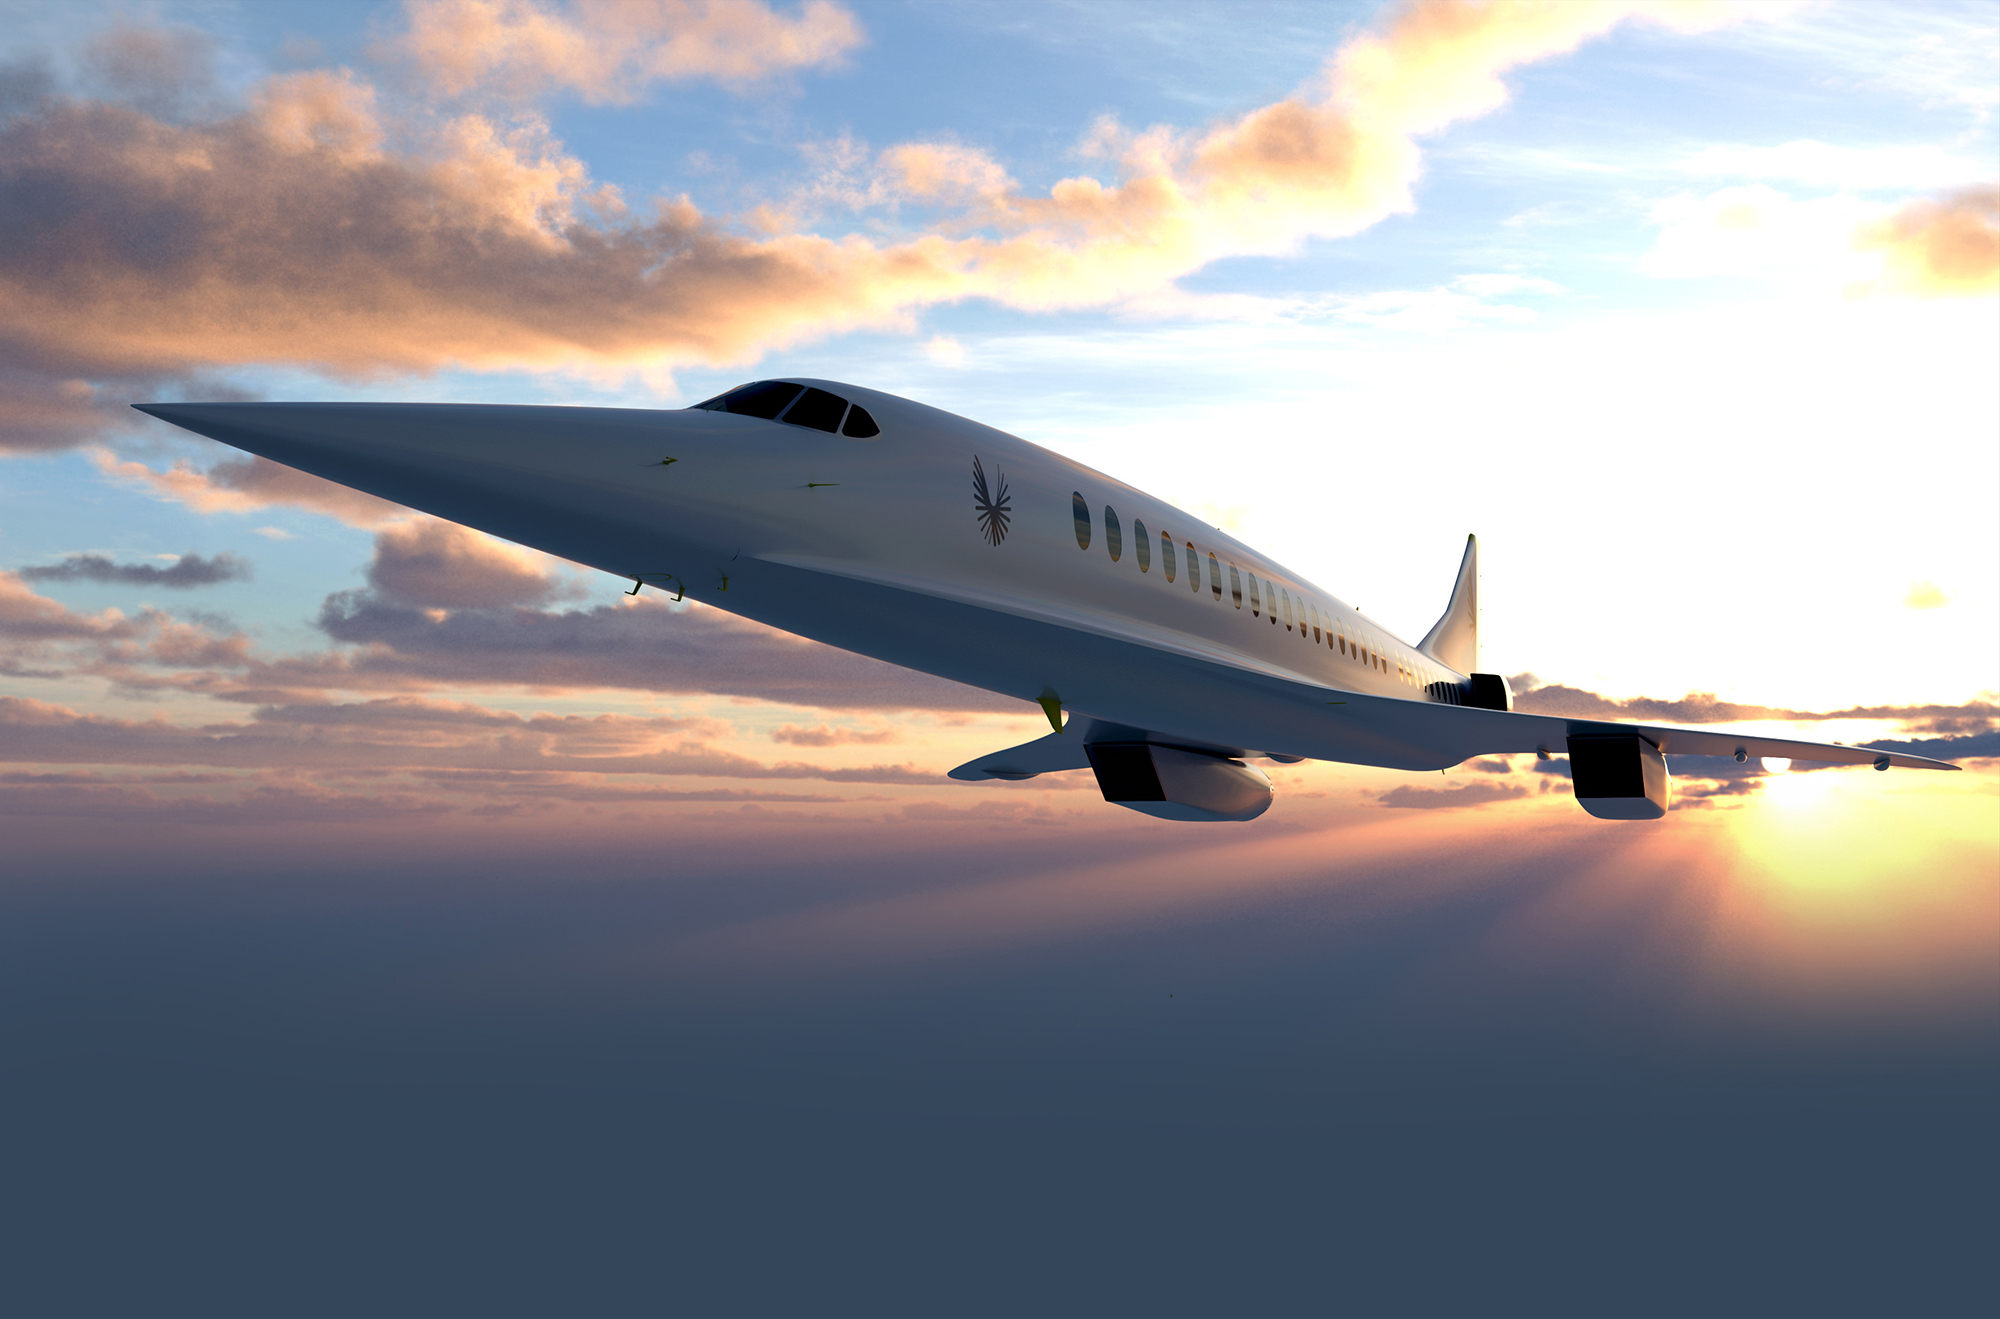 Concorde flies again! The iconic supersonic jet takes flight down